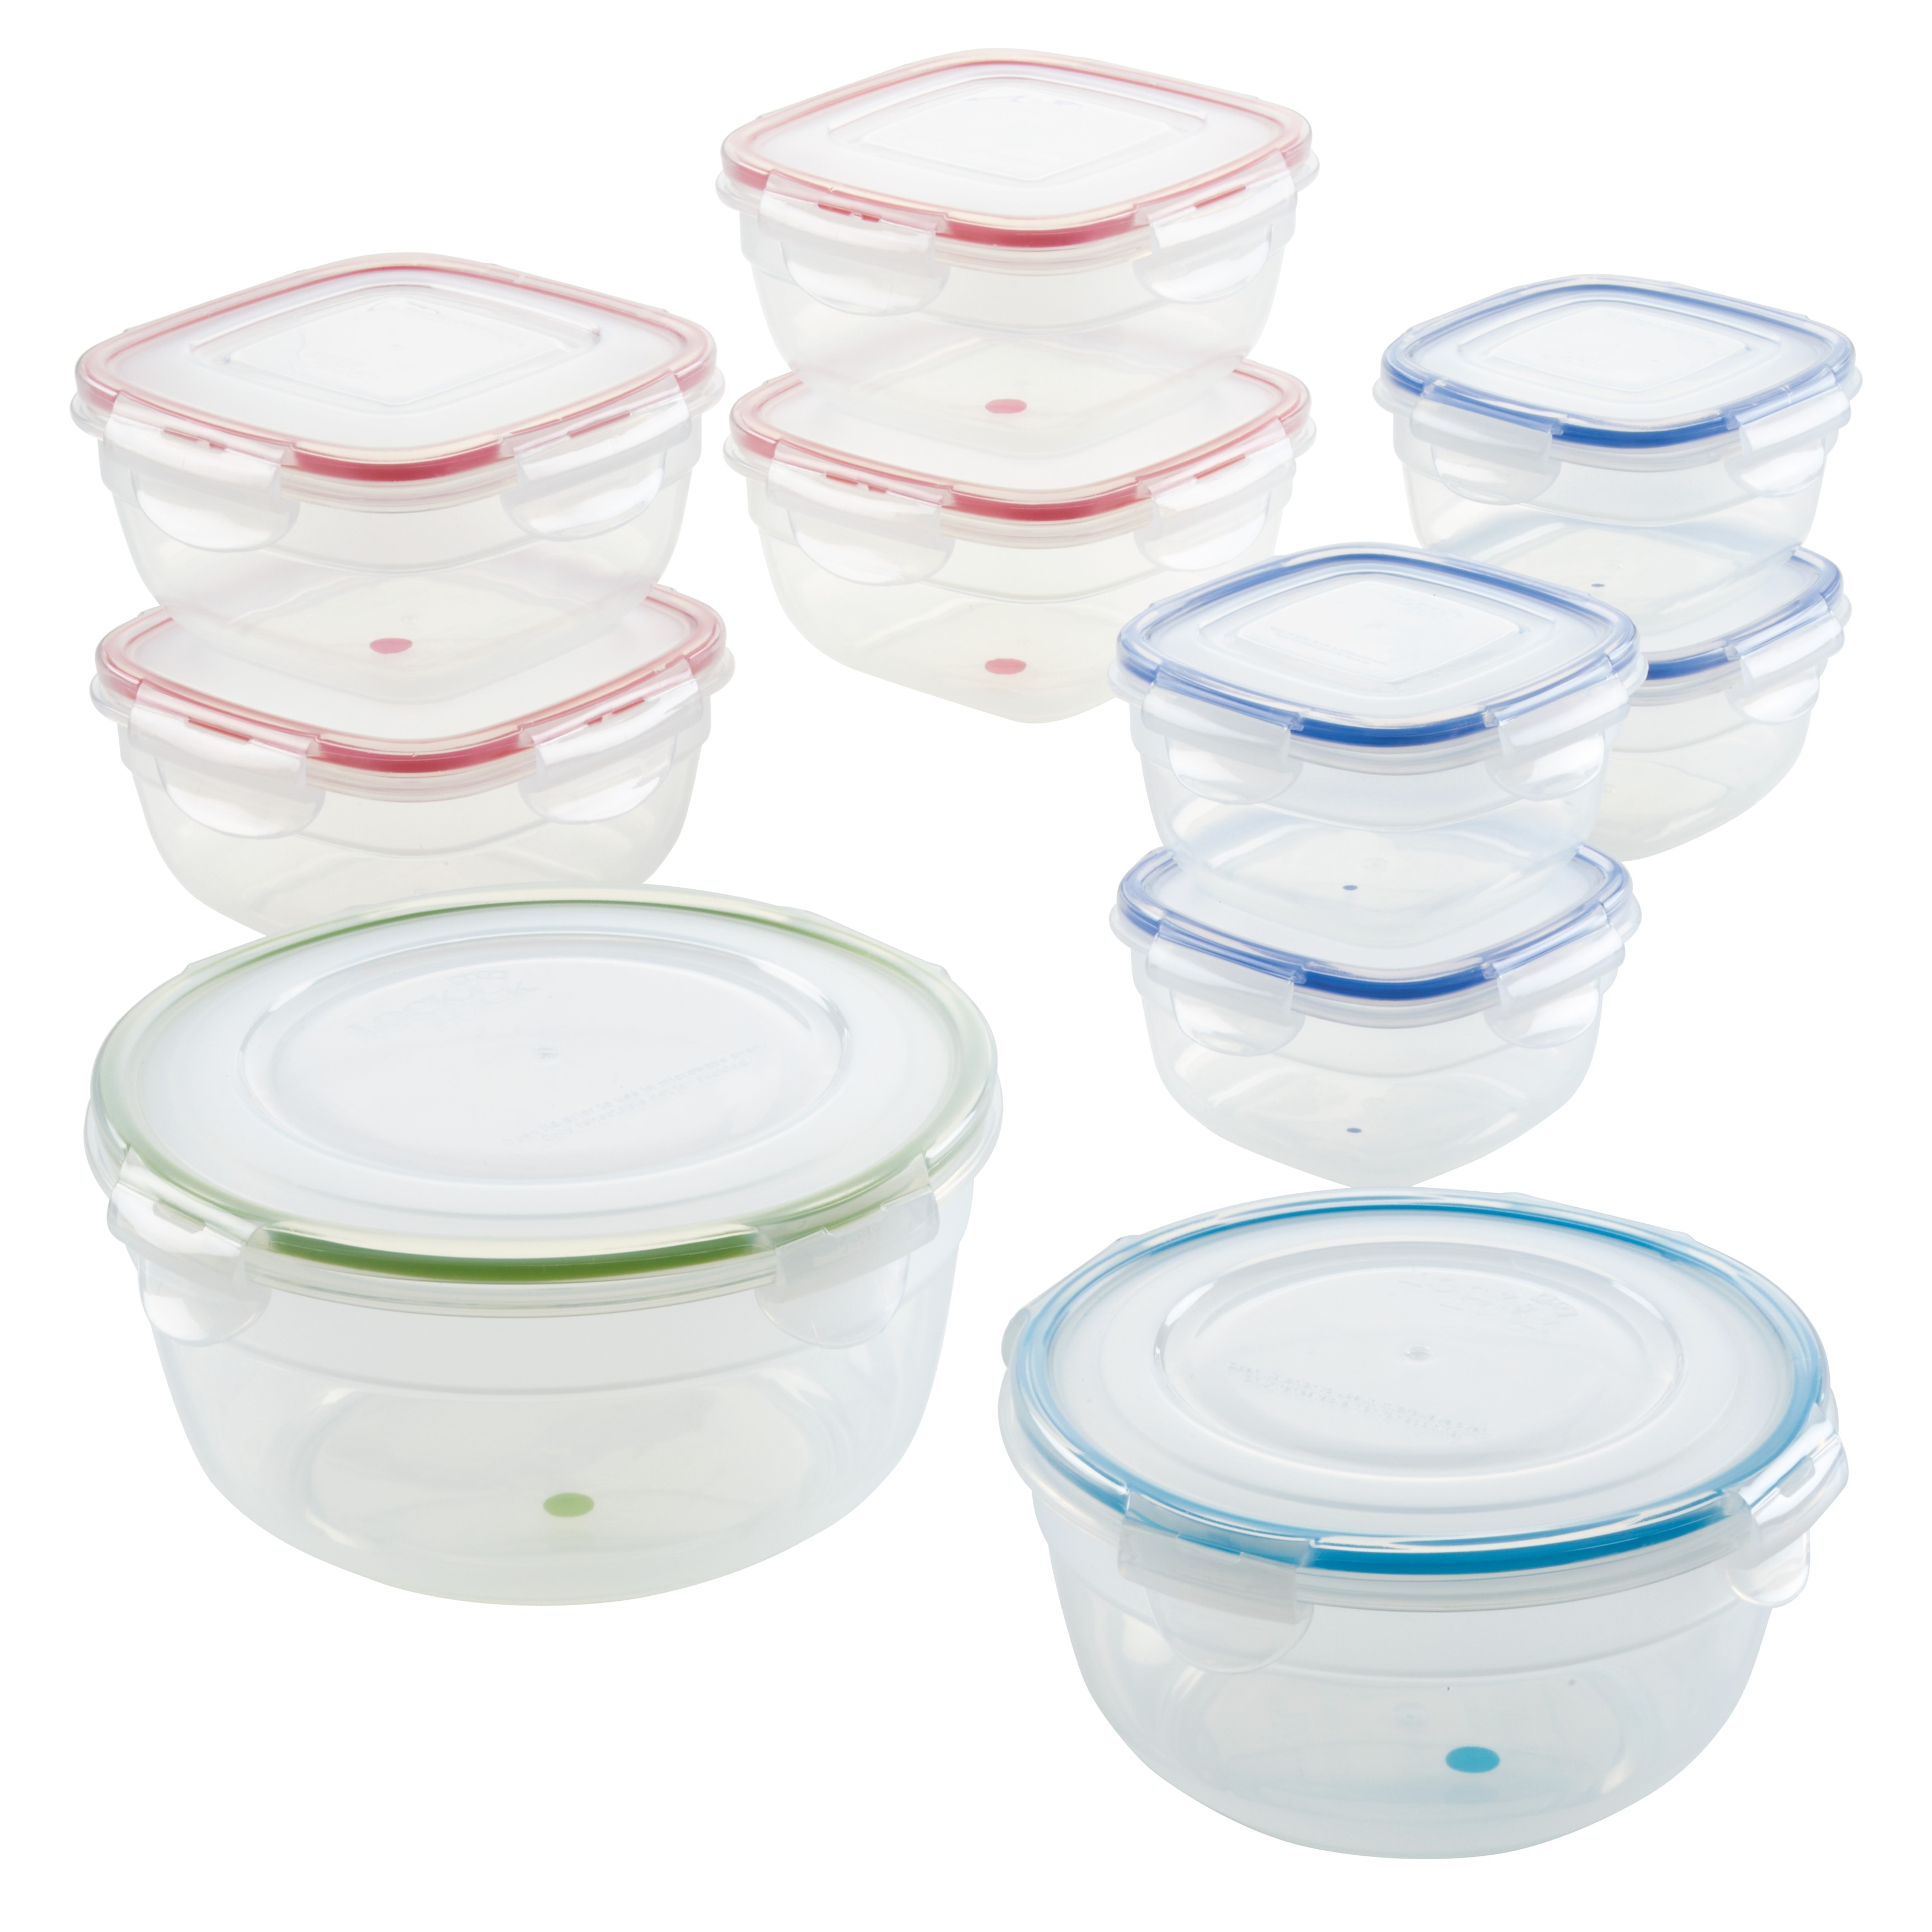 26 Pcs BPA Free Food Storage Containers with Lids, 100% Airtight, for Lunch,  Meal Prep, and Leftovers, Pantry Kitchen Storage Containers, Microwave,  Freezer and Dishwasher Safe 